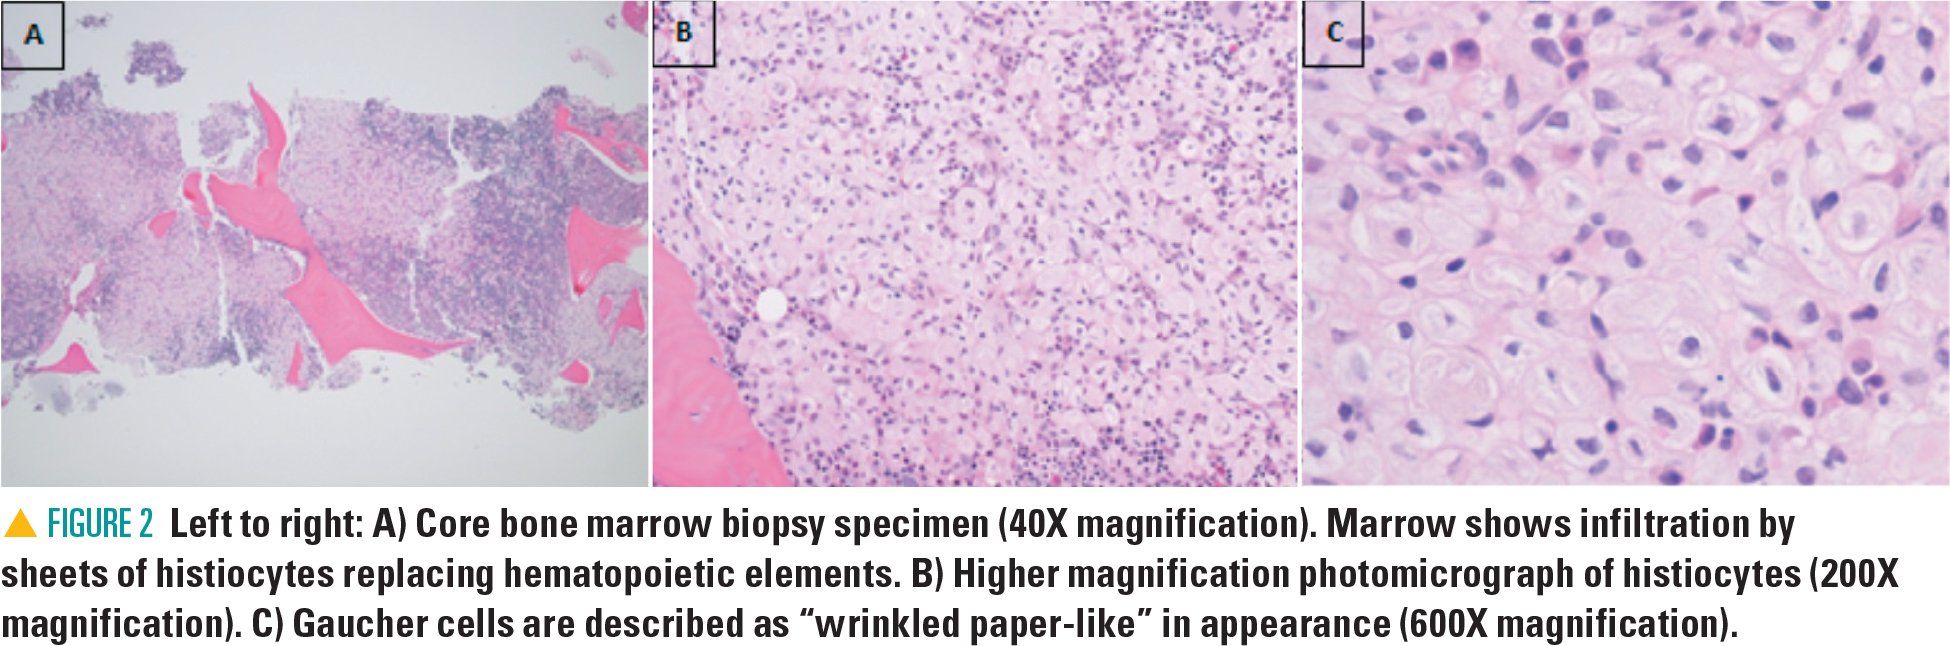 image of core bone marrow biopsy specimen at 40x magnification, 200x magnification, and 600x magnification which shows Gaucher cells